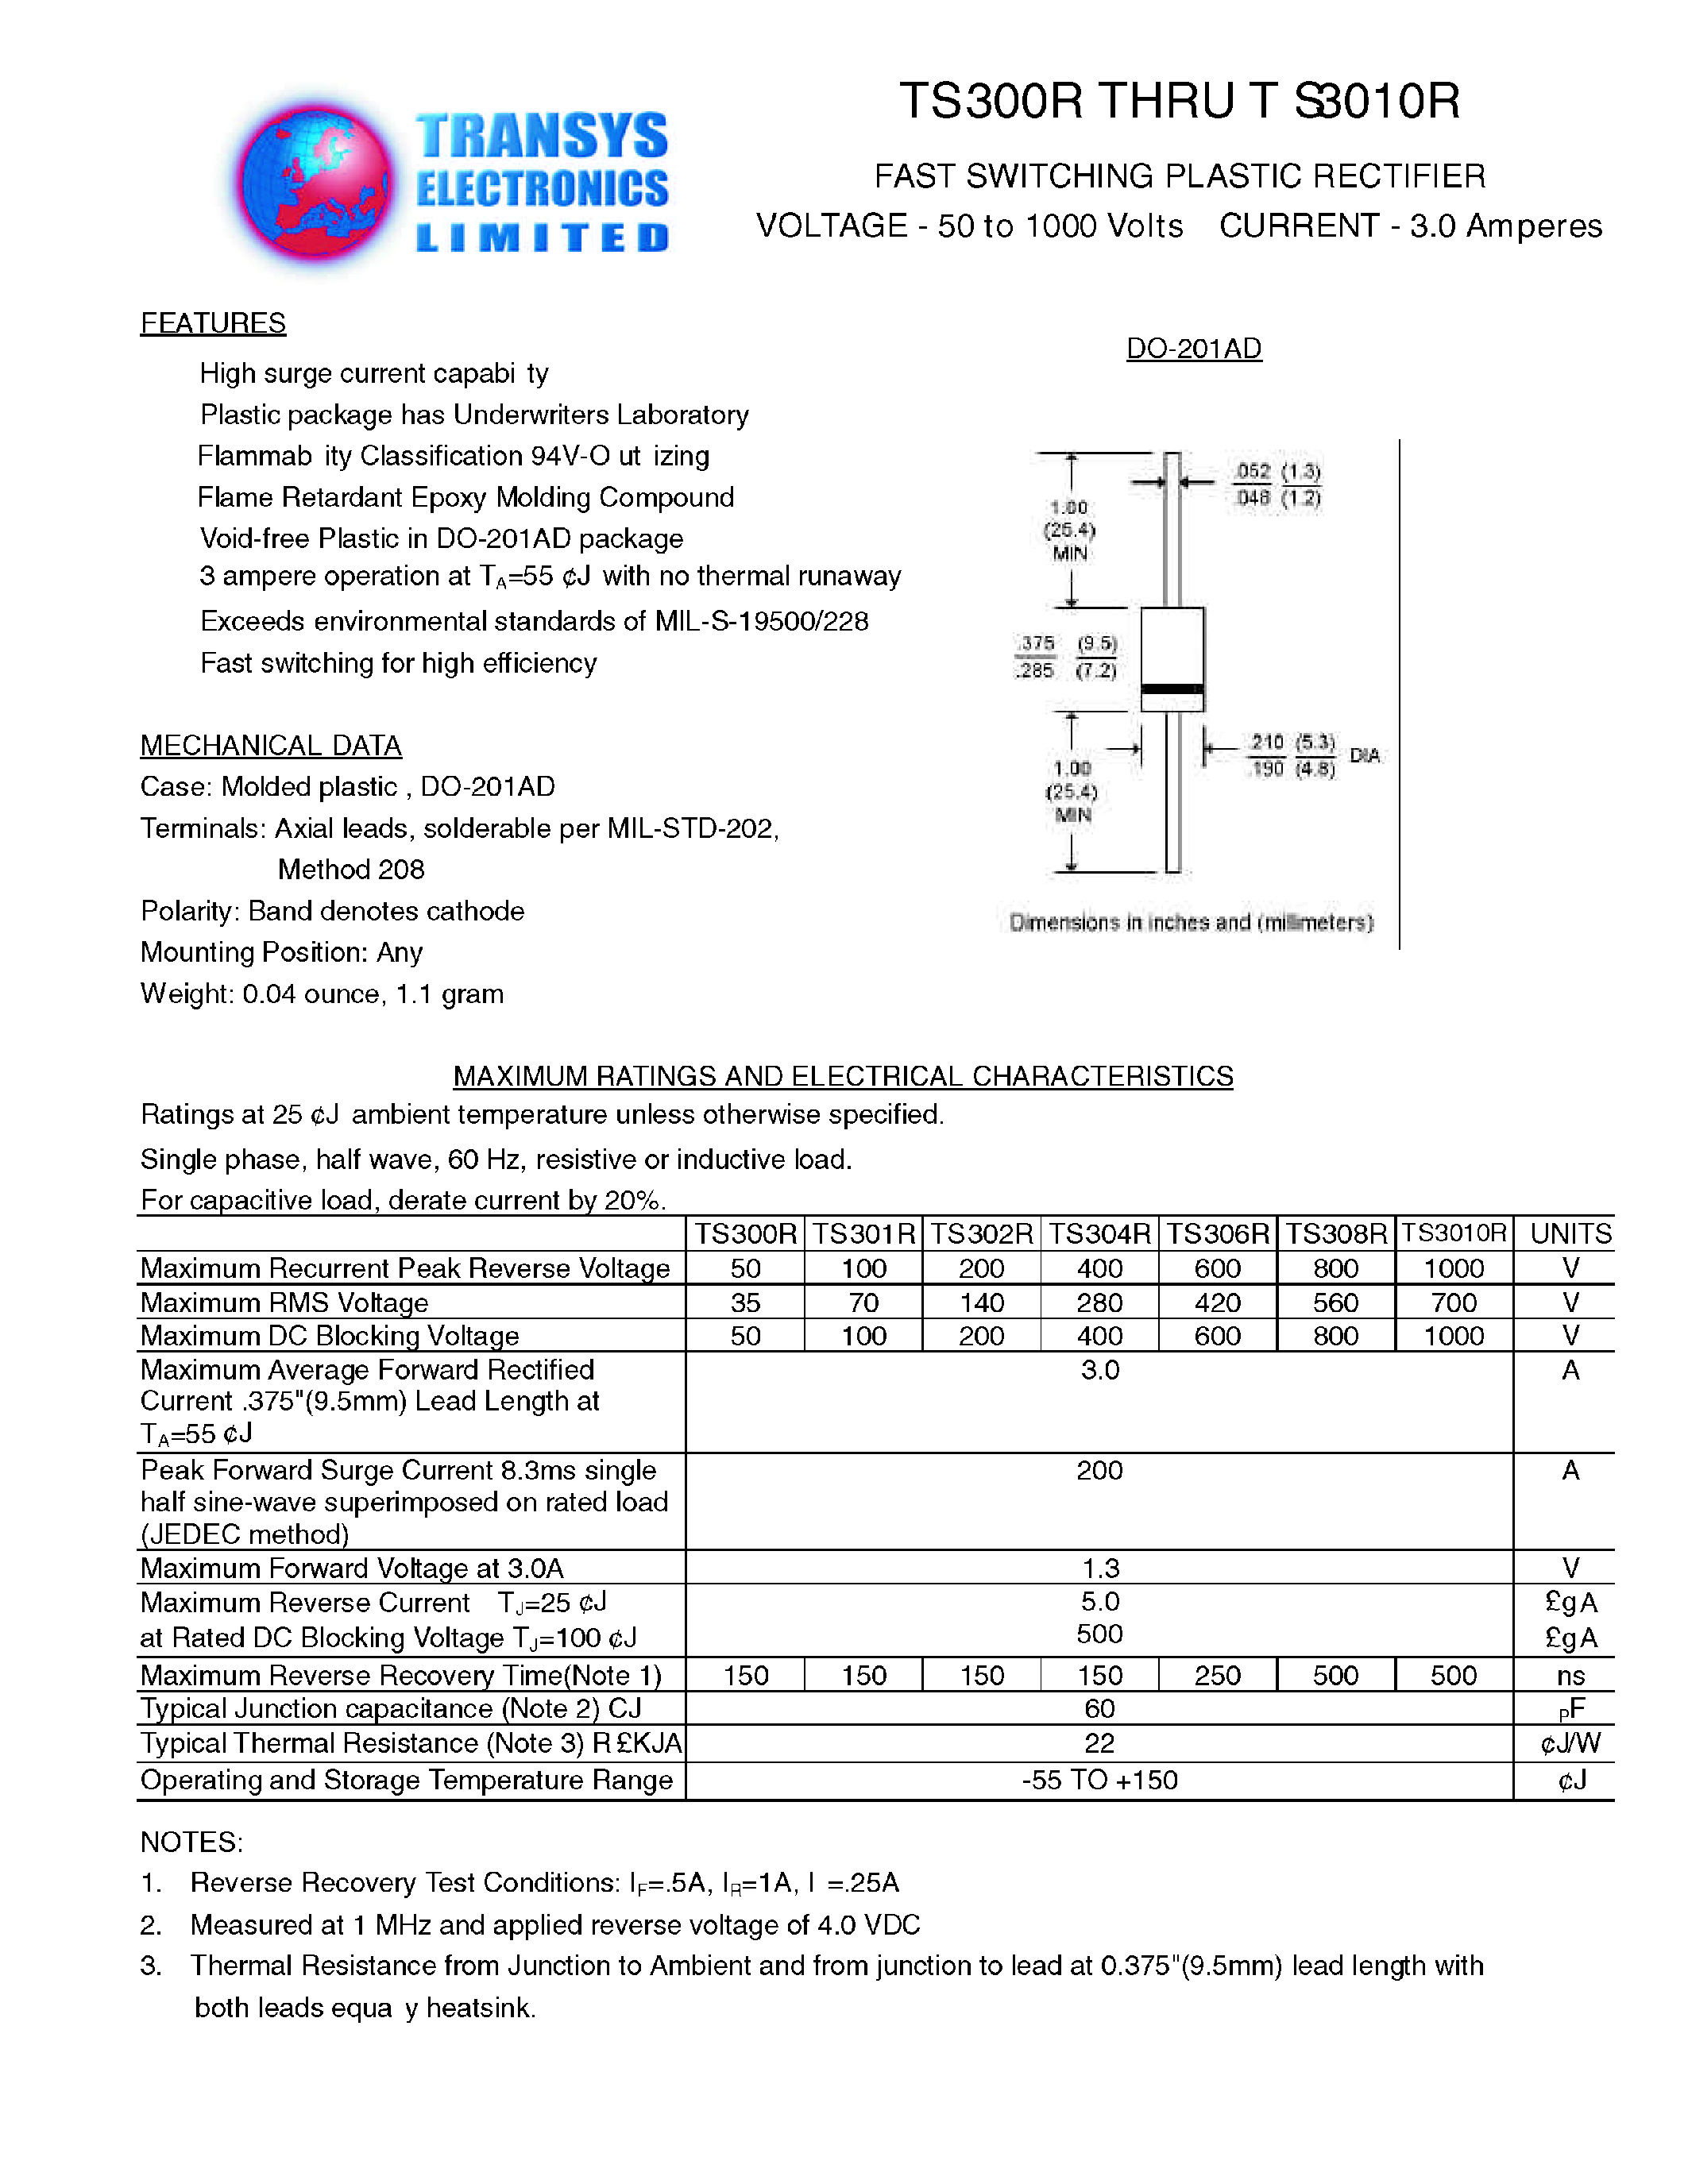 Datasheet TS301R - FAST SWITCHING PLASTIC RECTIFIER page 1